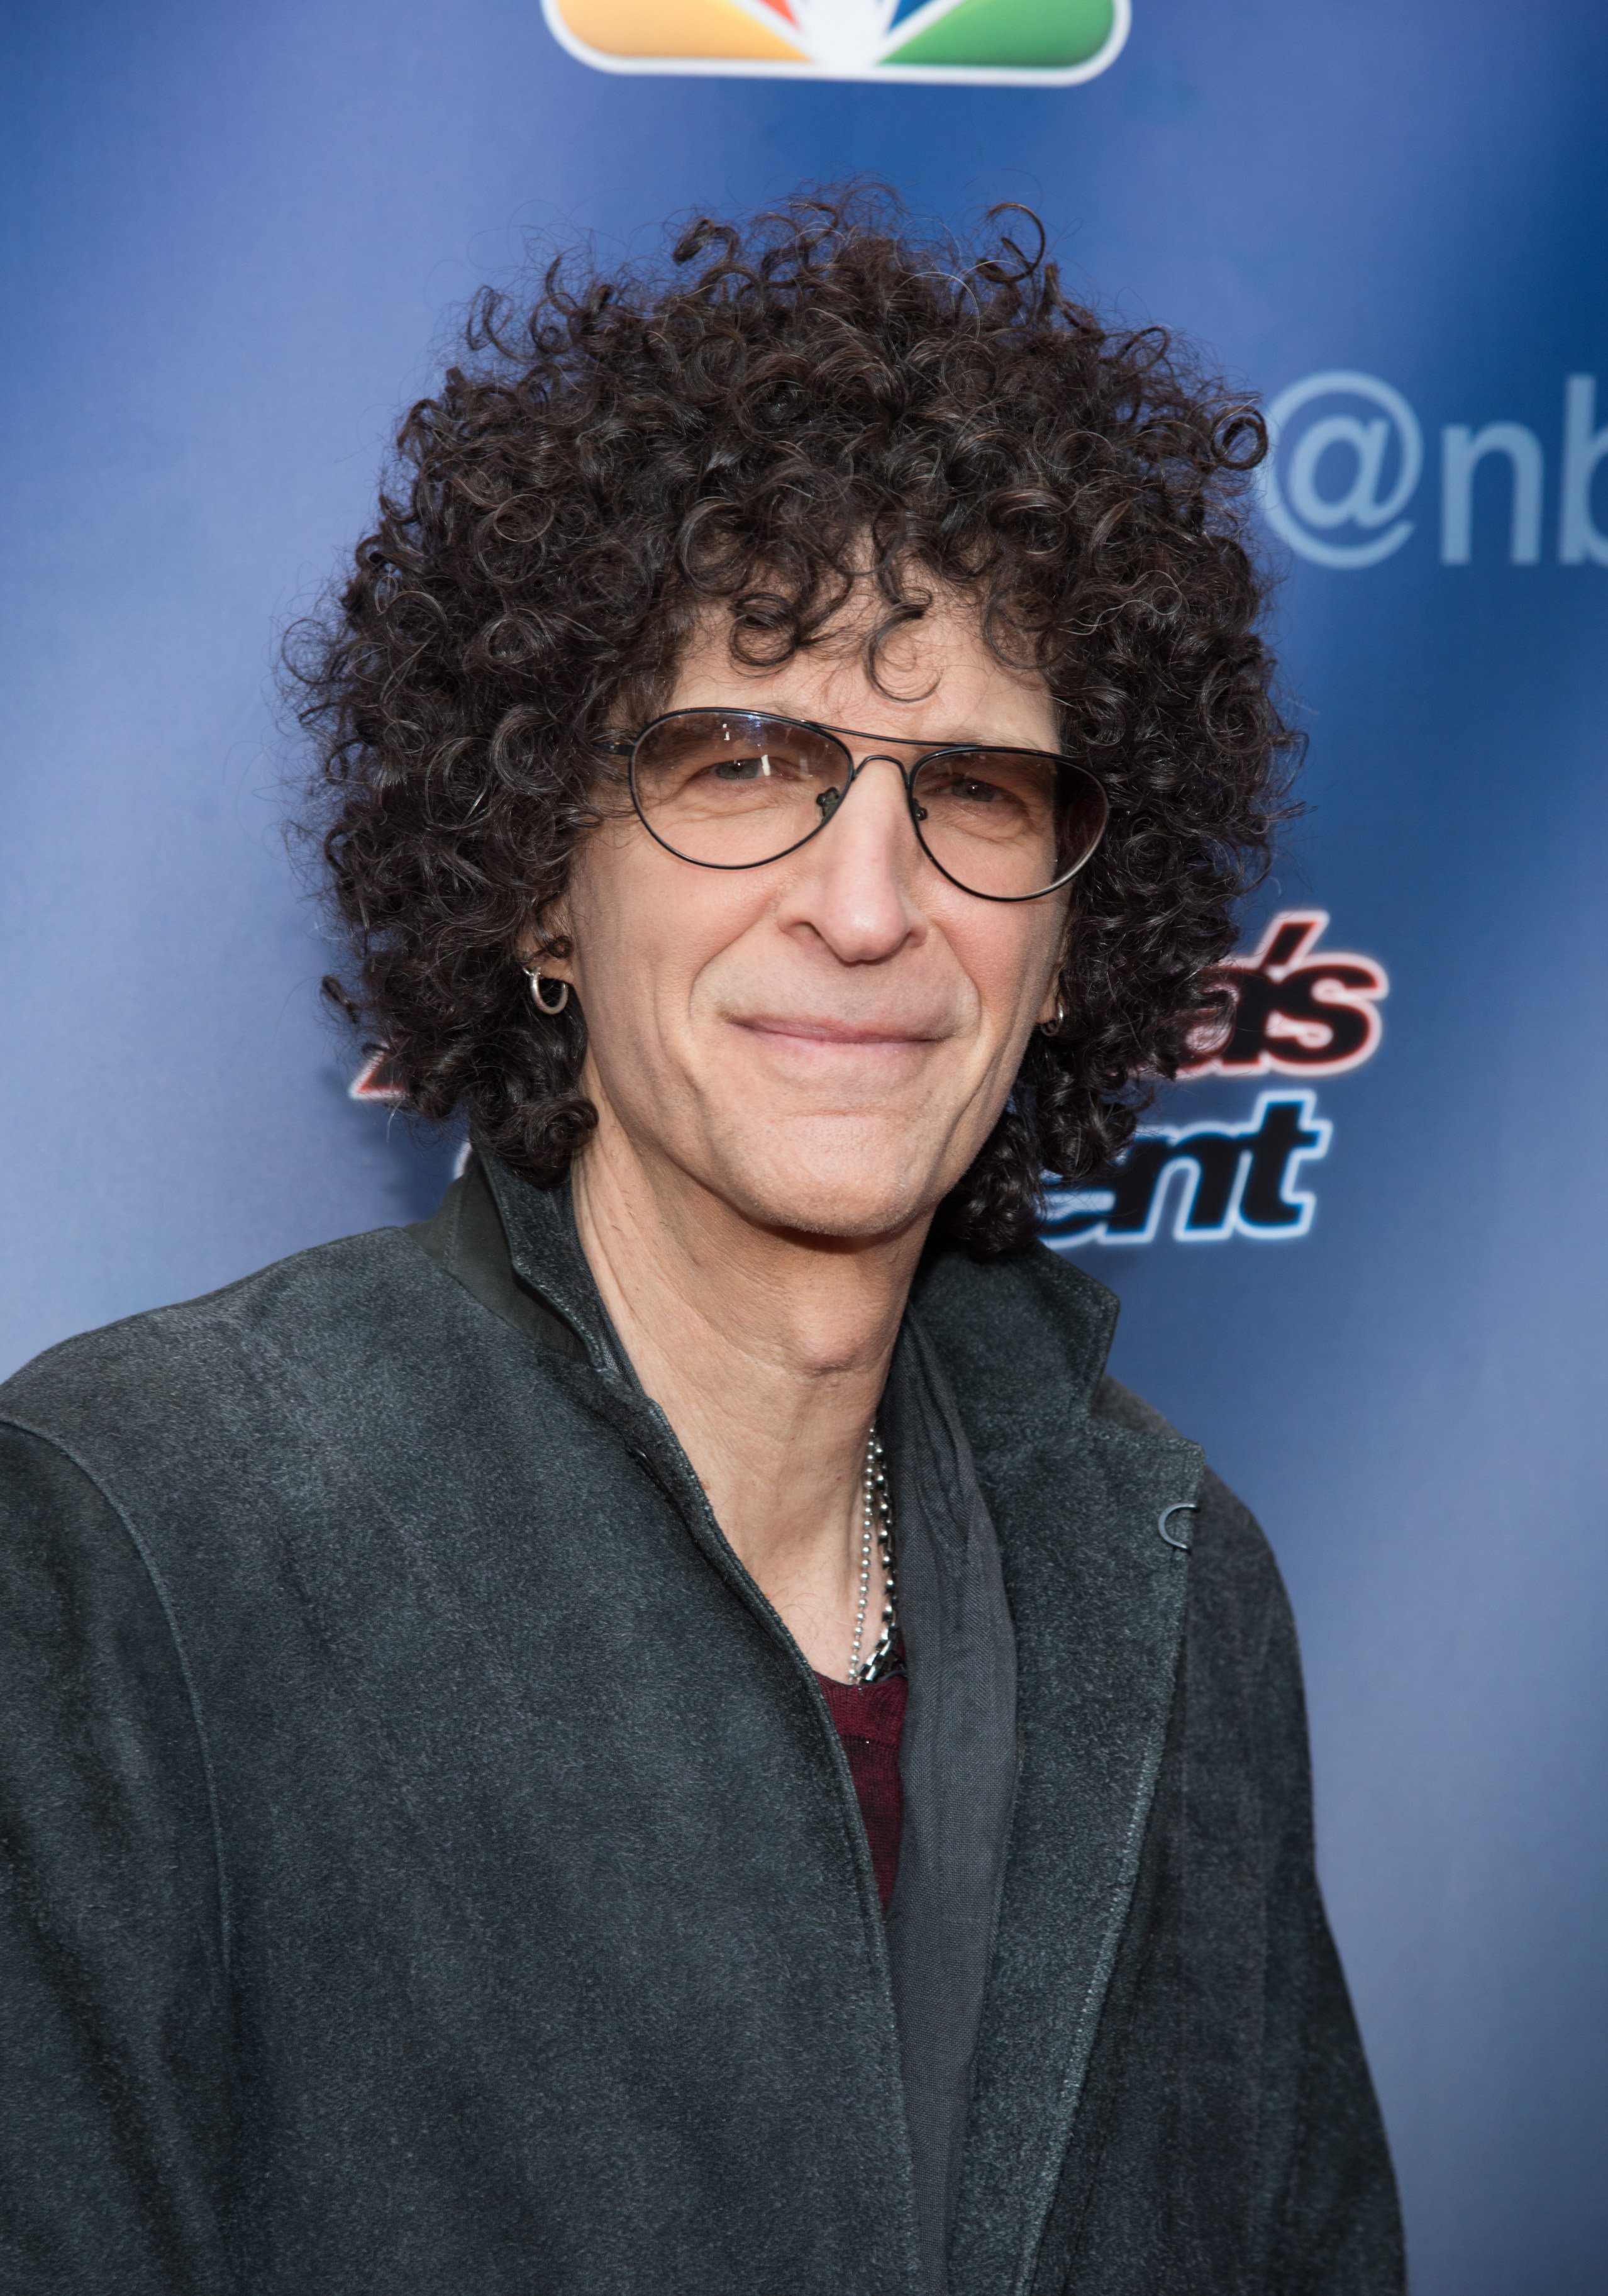 Howard Stern arrives at the "America's Got Talent" Season 10 Red Carpet Event at New Jersey Performing Arts Center on March 2, 2015. | Source: Getty Images